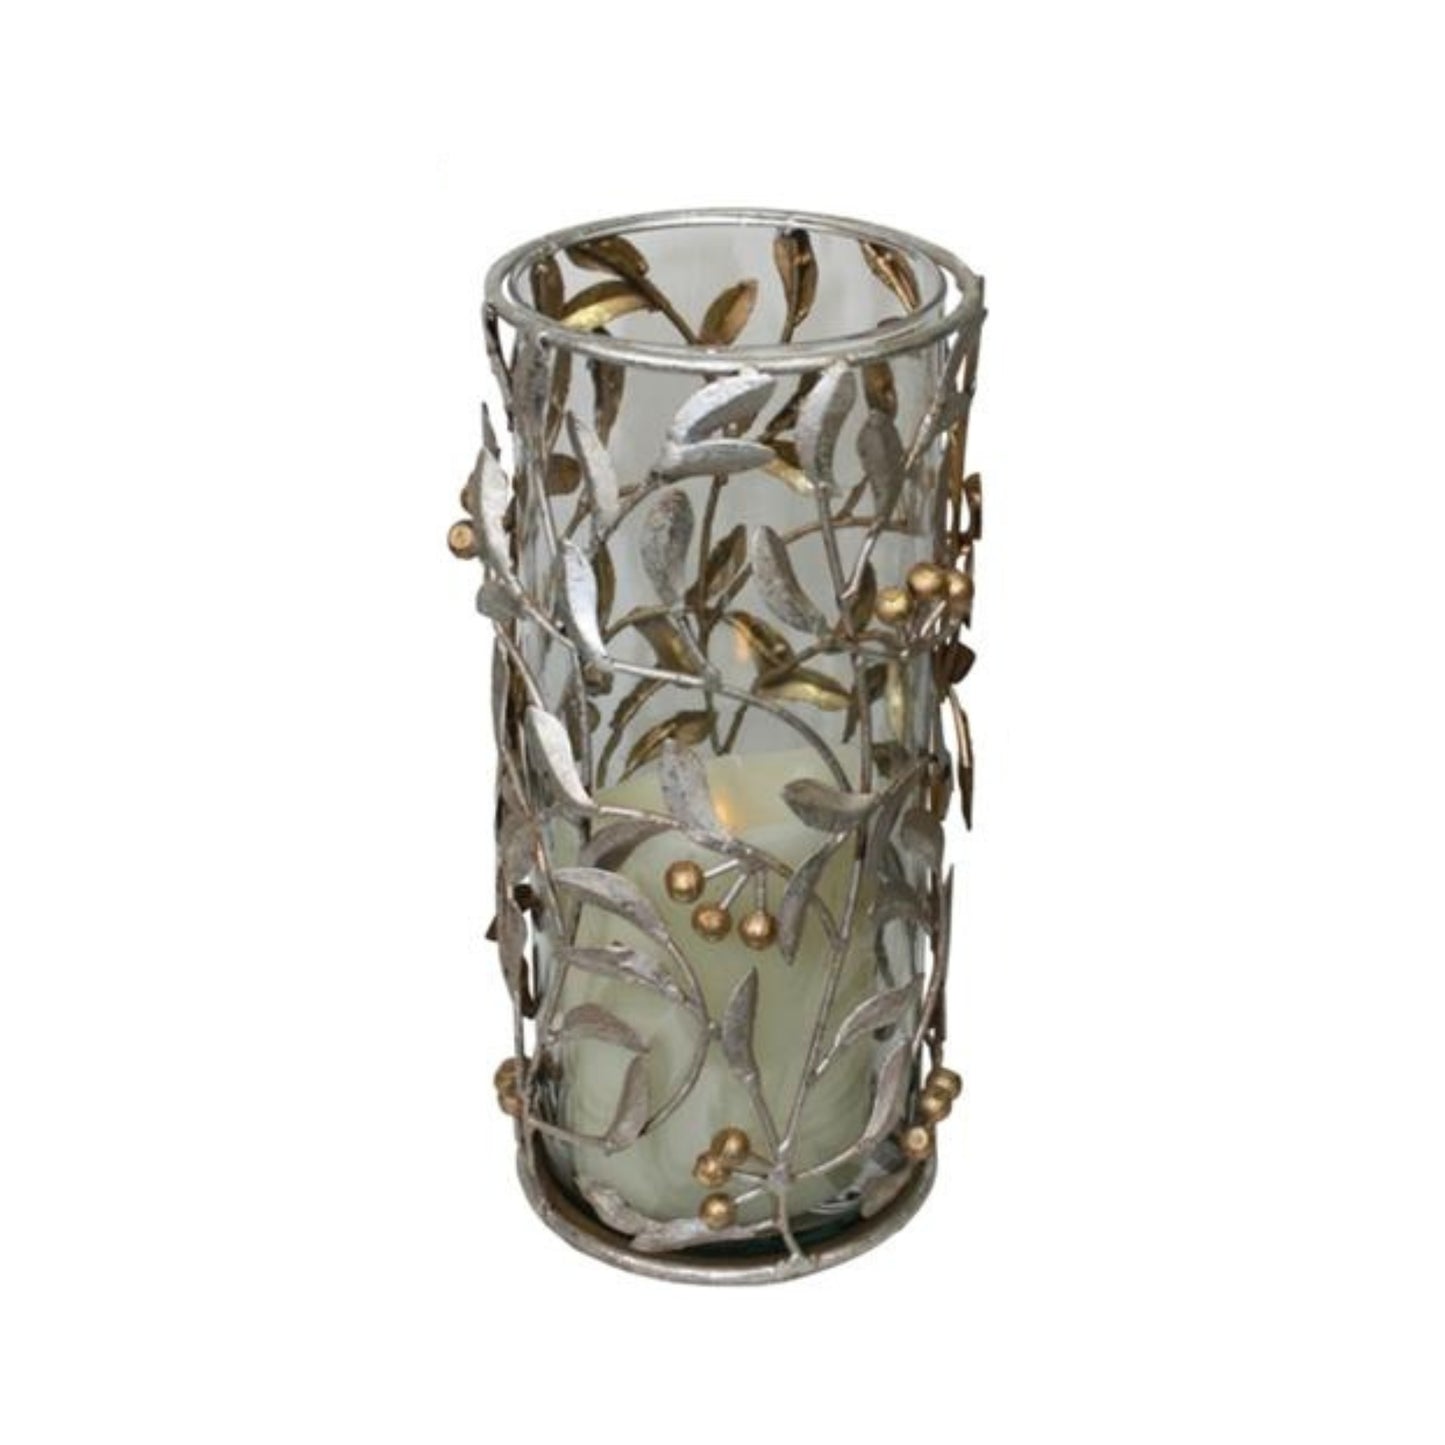 Silver and Gold Iron Hurricanes - Leaf & Berry Accented Iron & Glass Candle Holders - 3 Sizes to Choose From | Medium Iron Candle Holder Shown | INSIDE OUT | InsideOutCatalog.com